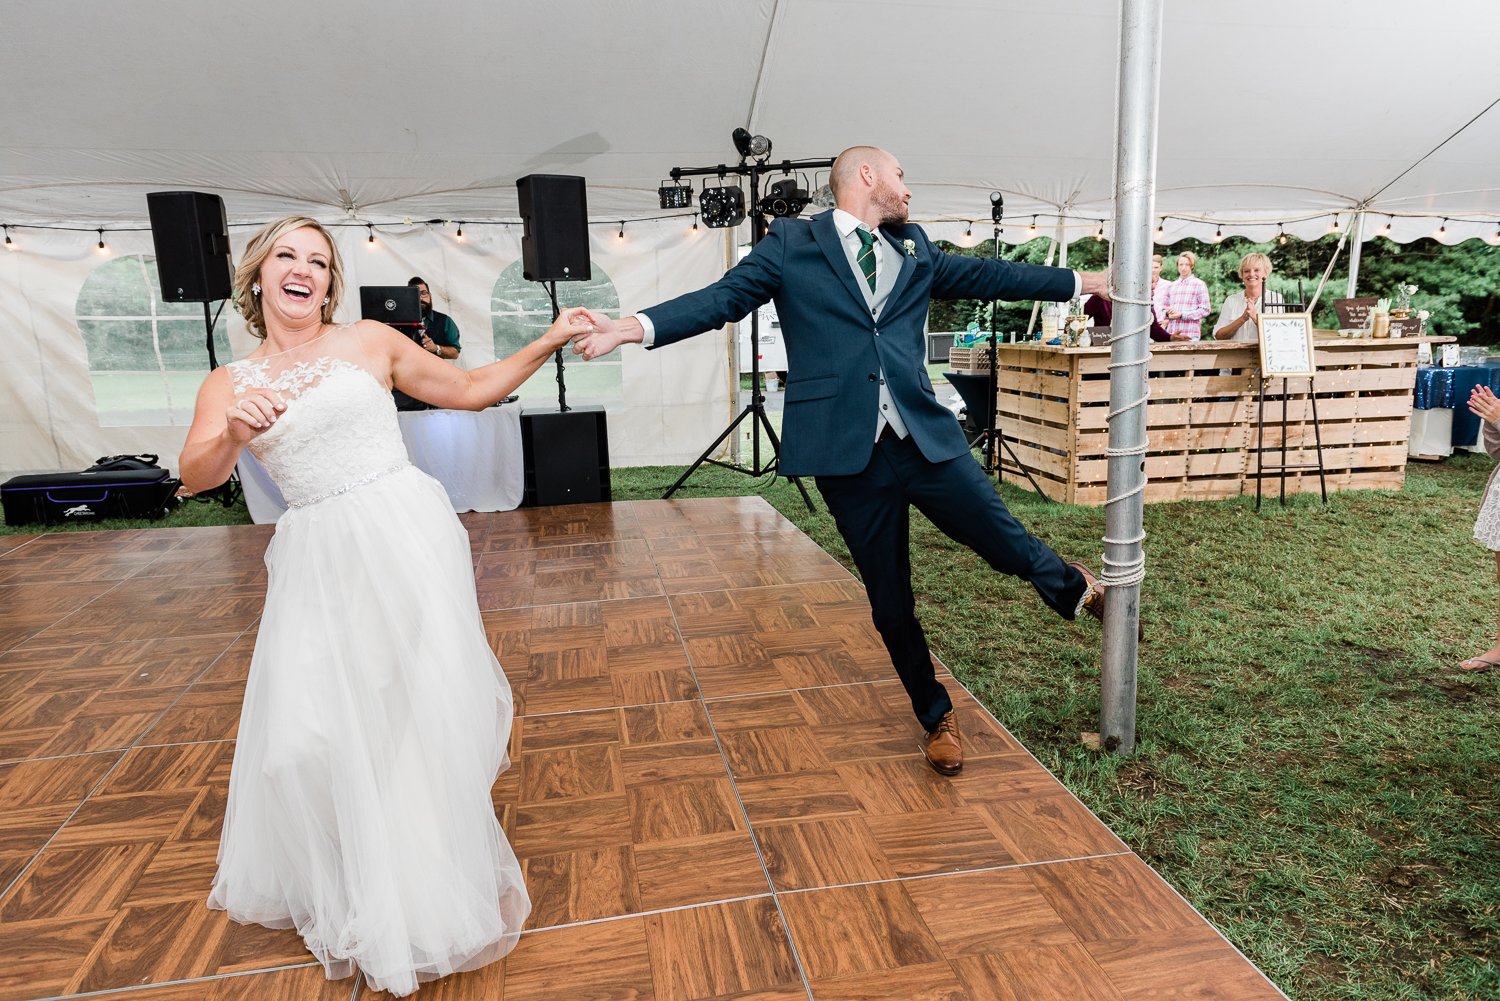 Newly married couple dancing at backyard tent wedding